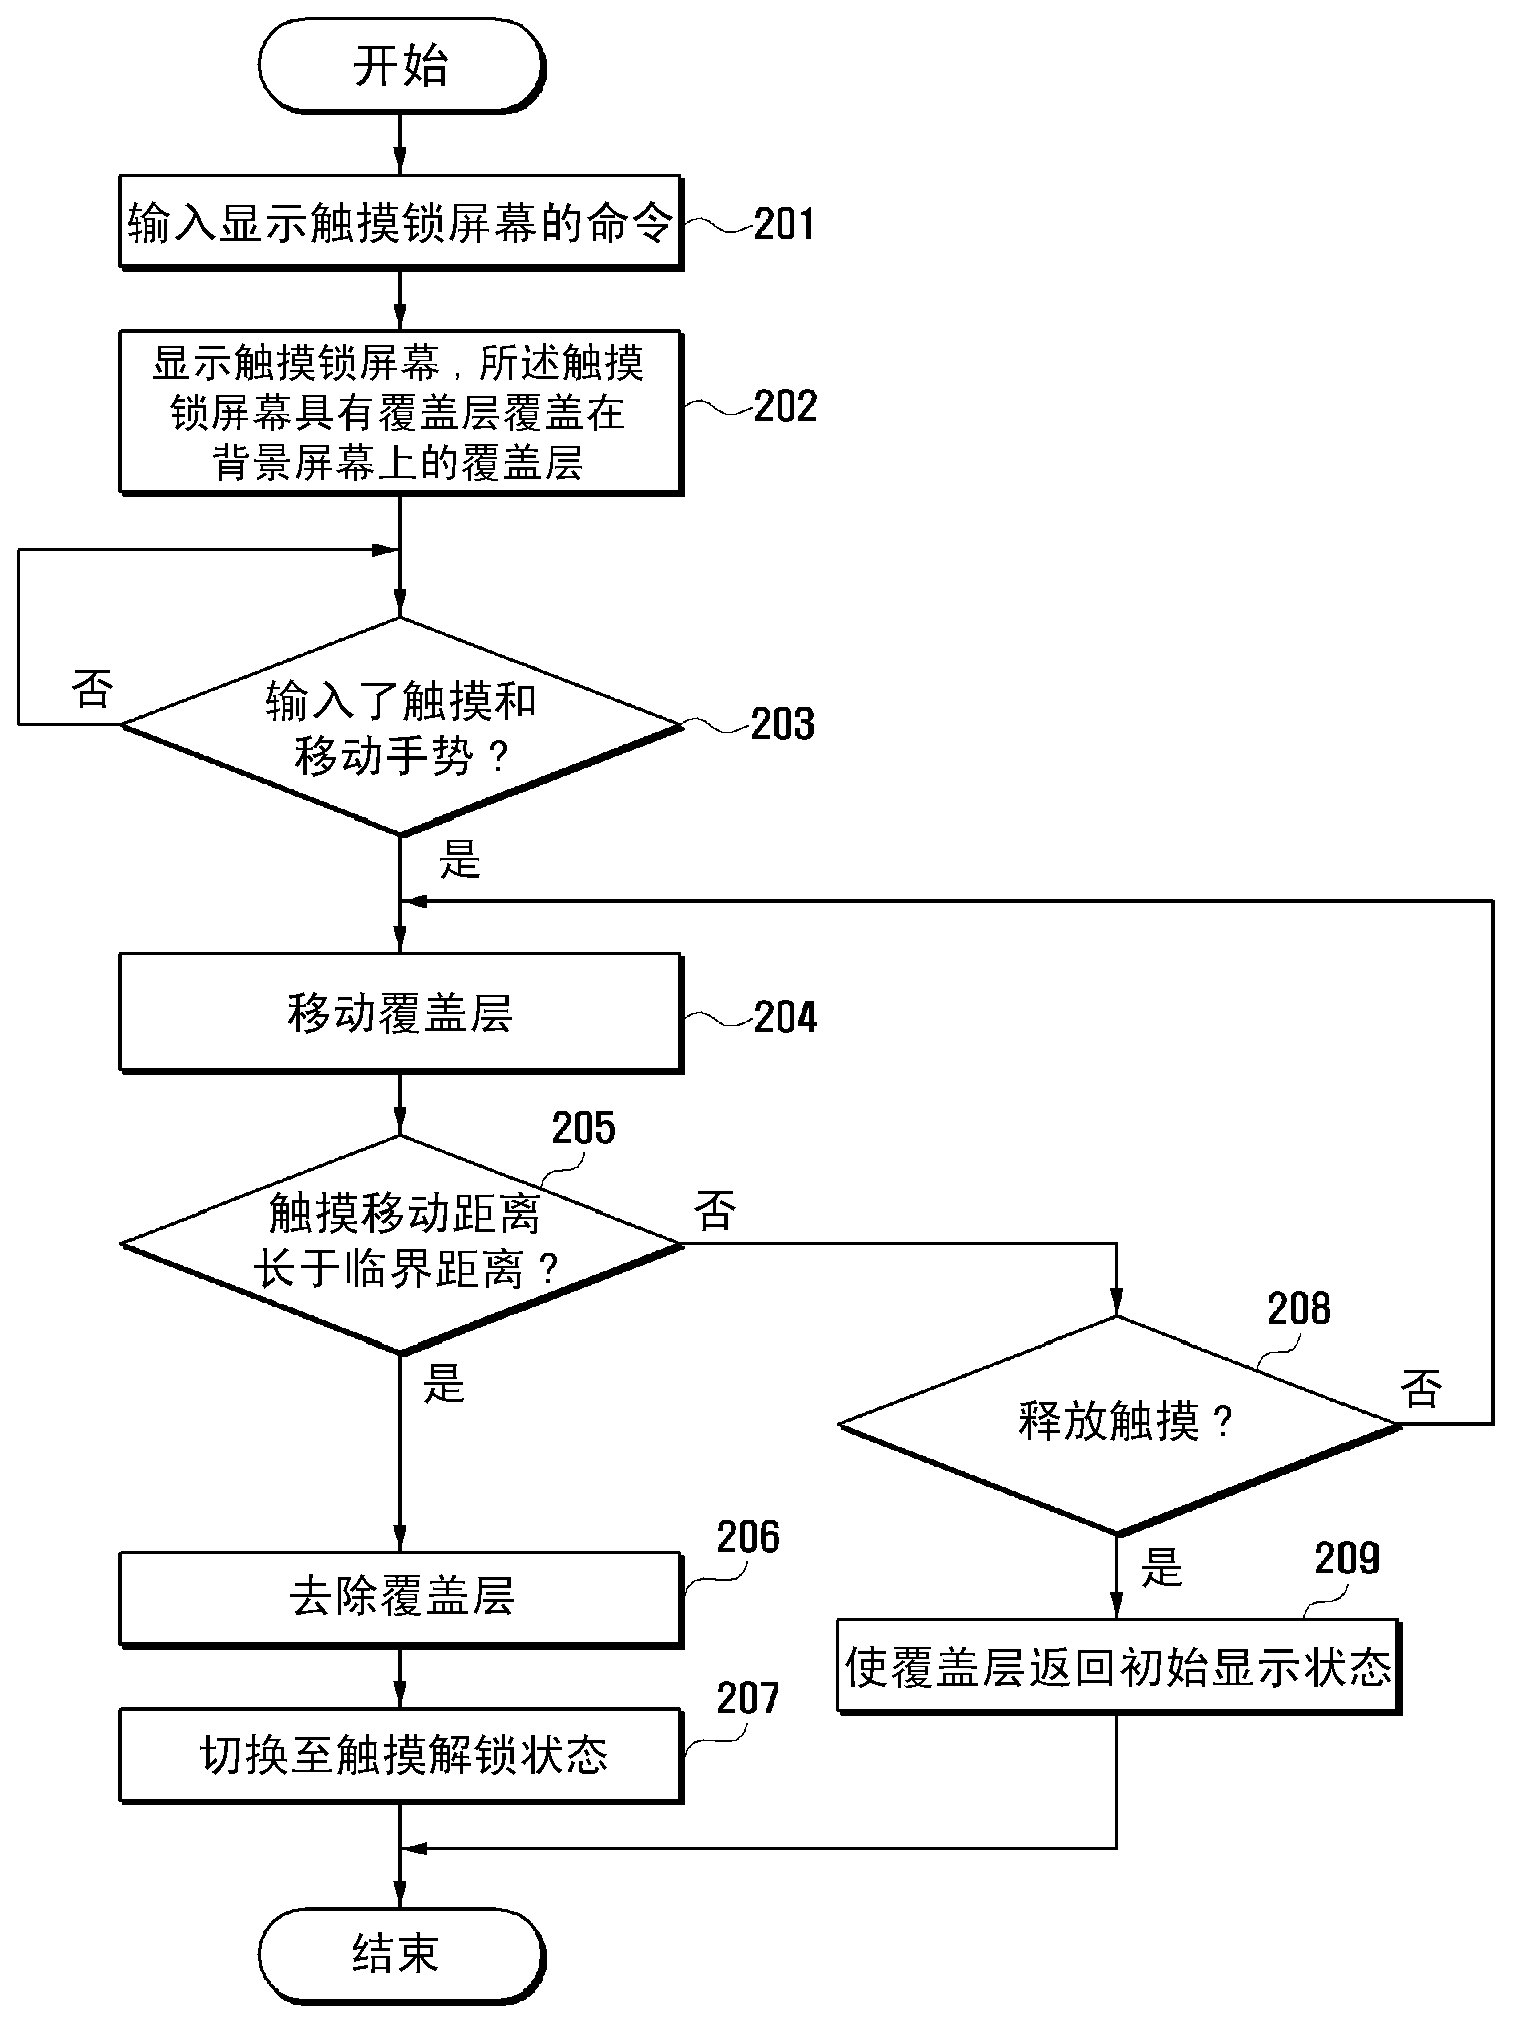 Touch-based mobile device and method for performing touch lock function of the mobile device